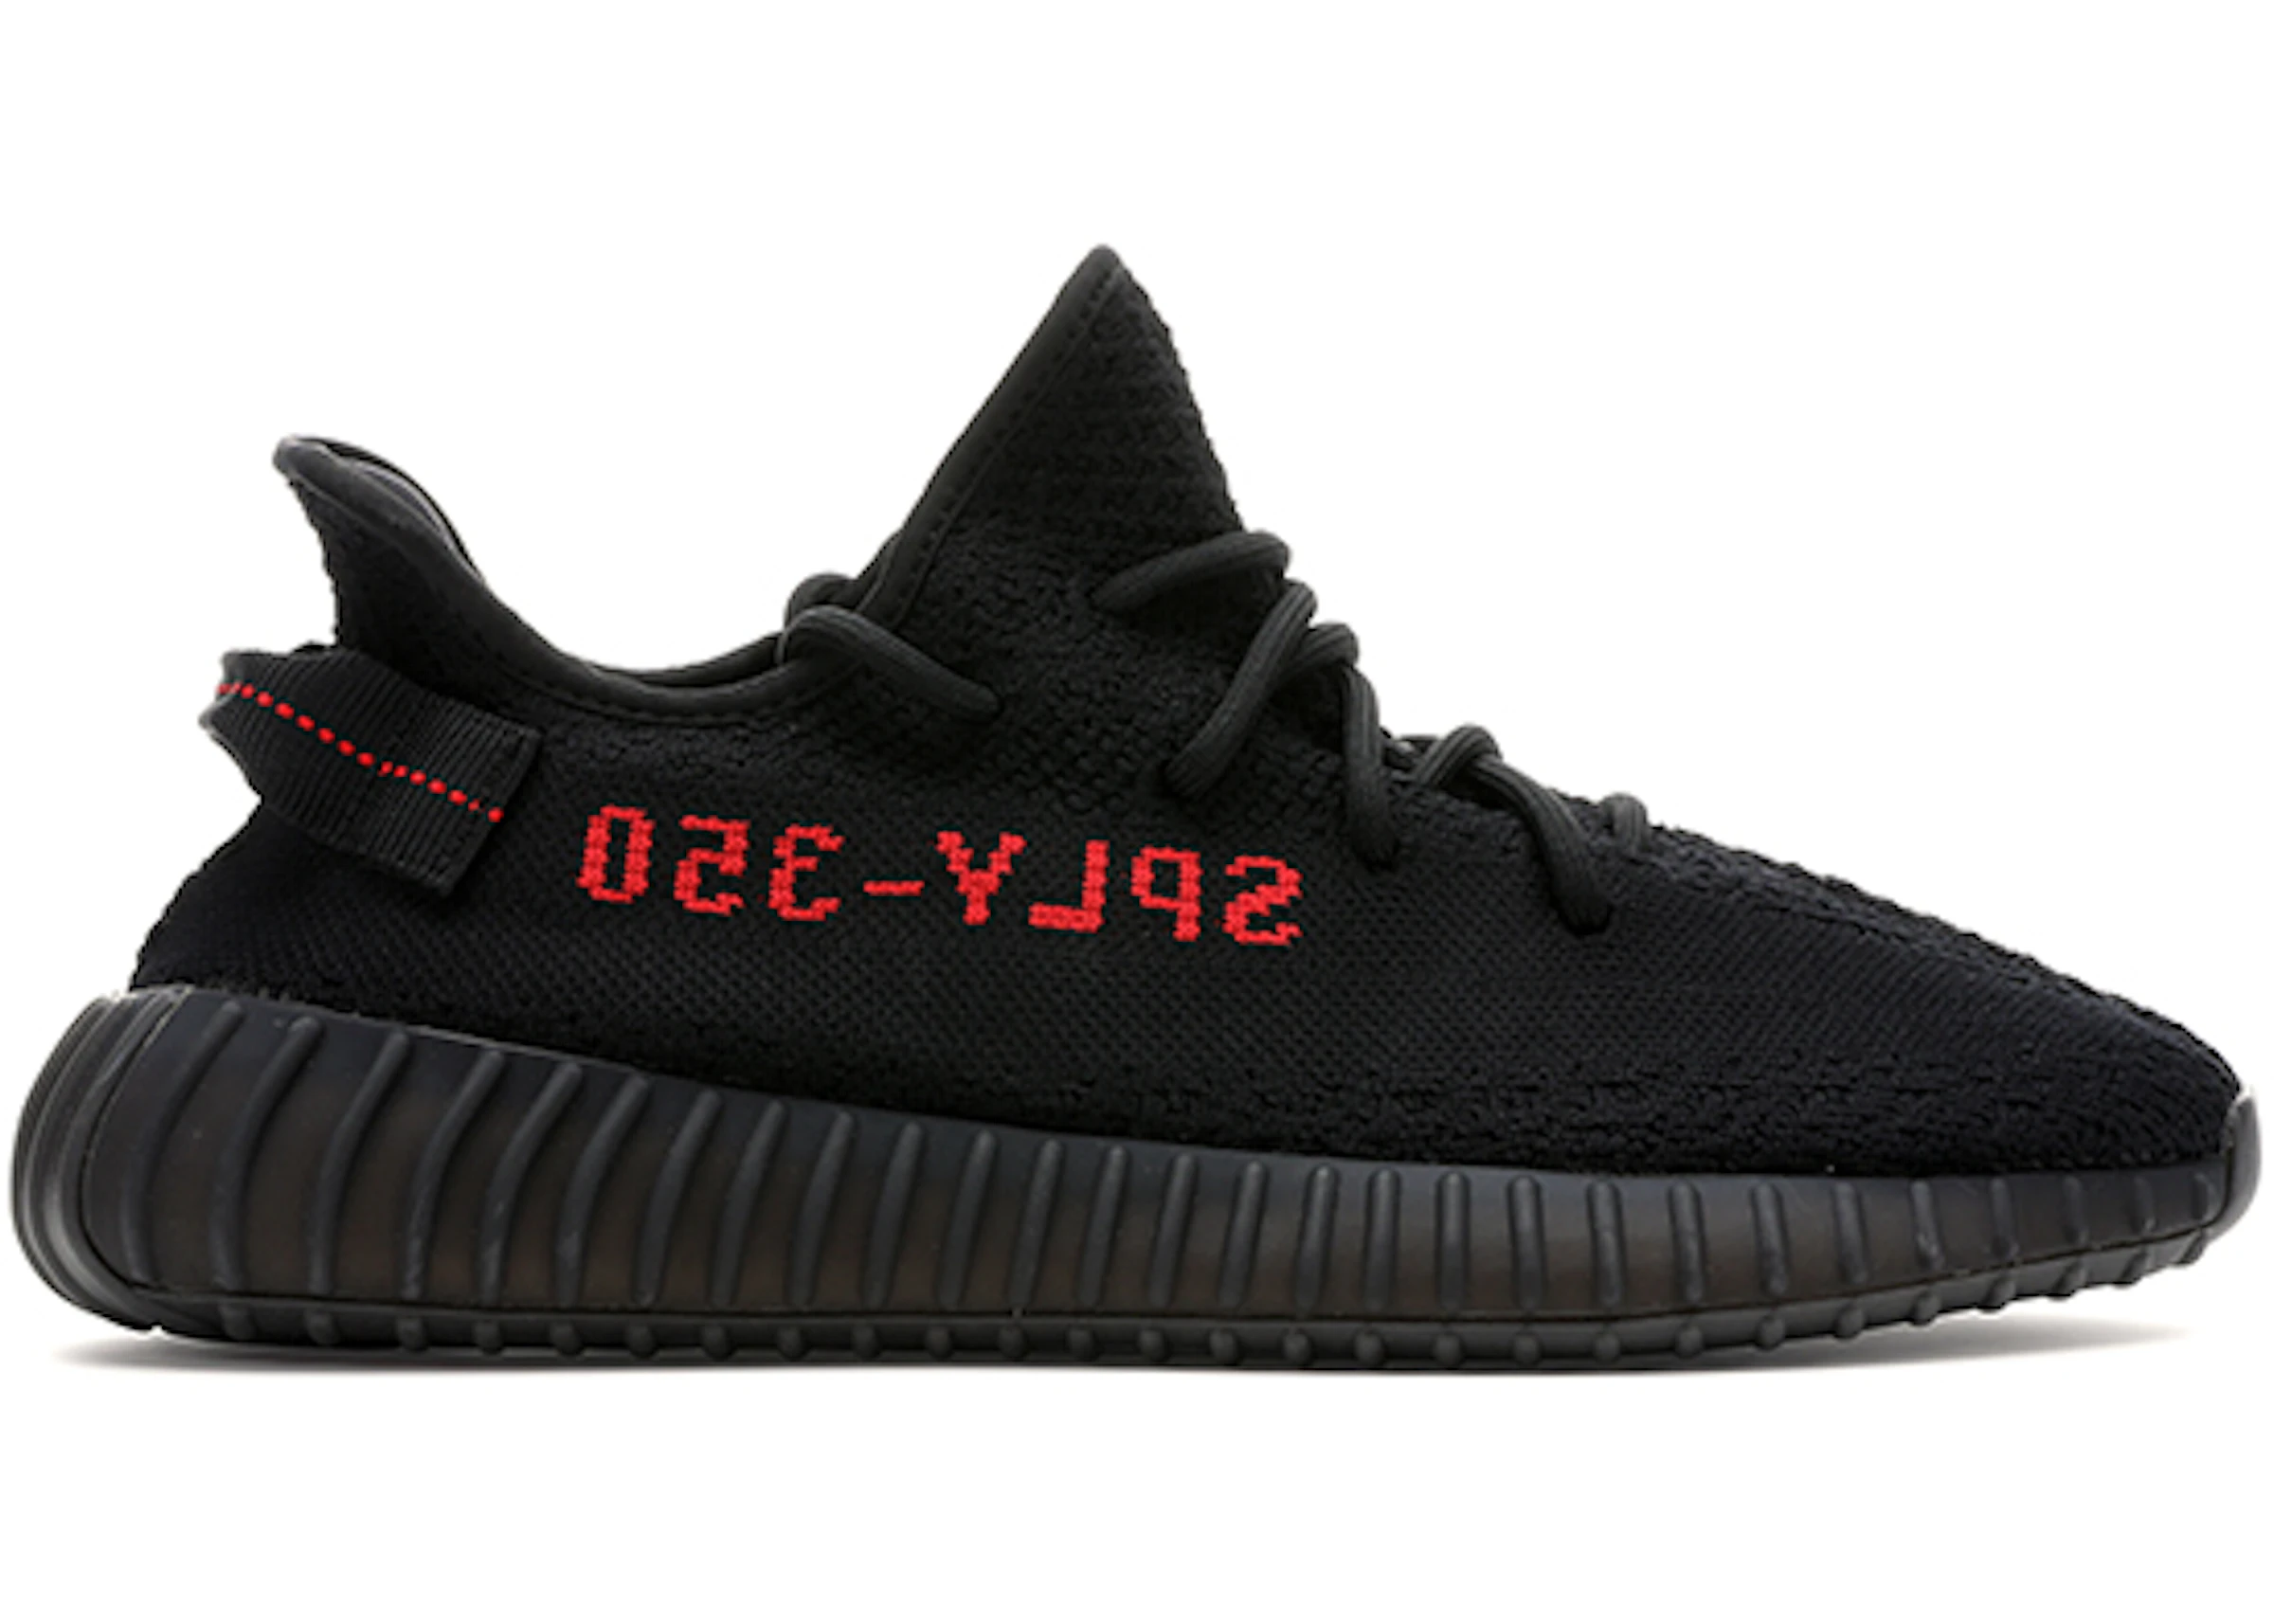 Imidlertid Colonial kød adidas Yeezy Boost 350 V2 Black Red (2017/2020) - CP9652 - US